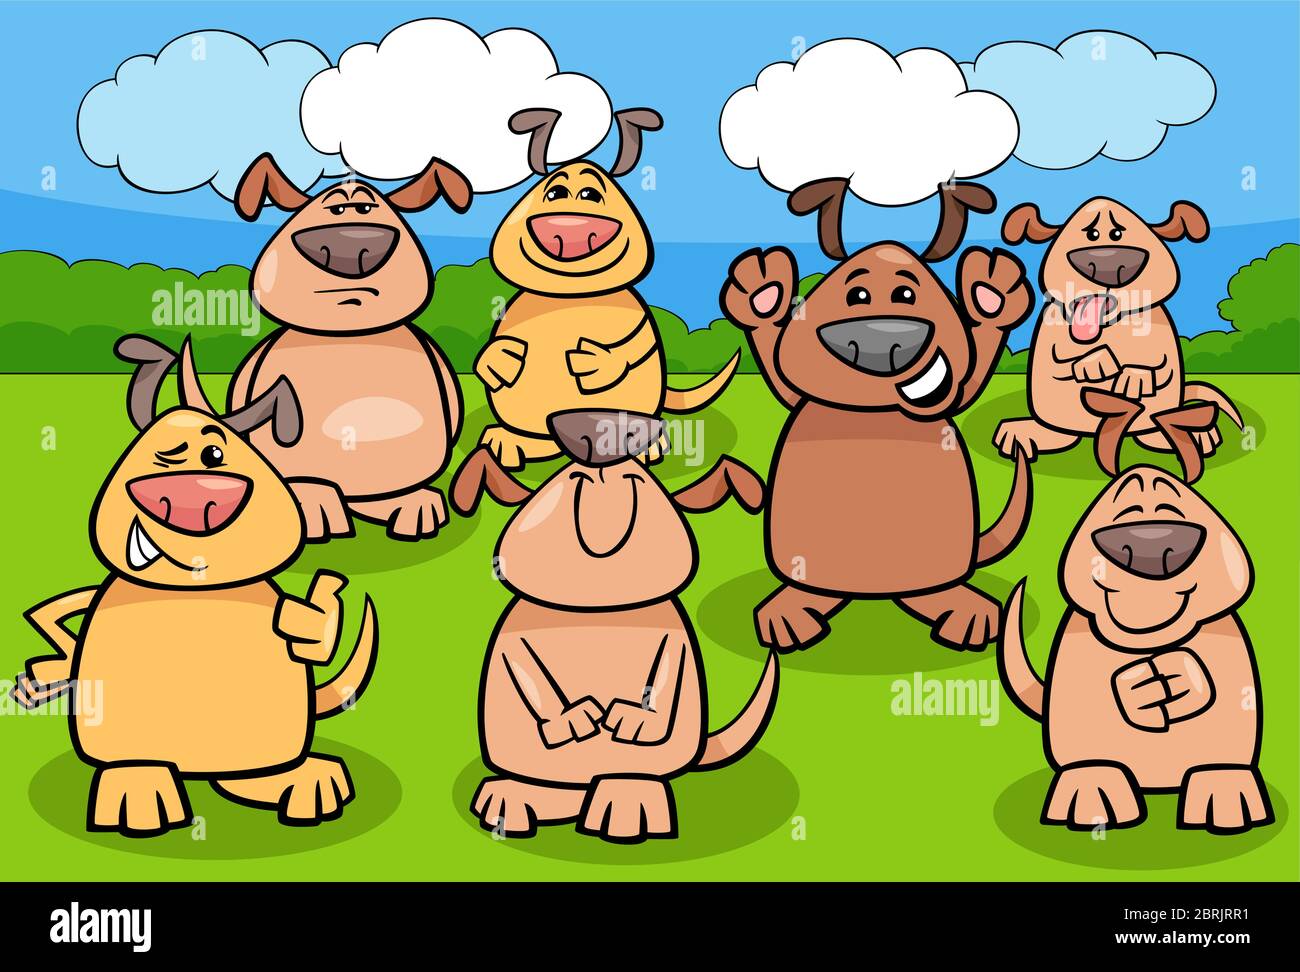 Cartoon Illustration of Funny Dogs and Puppies Animal Characters Group Stock Vector